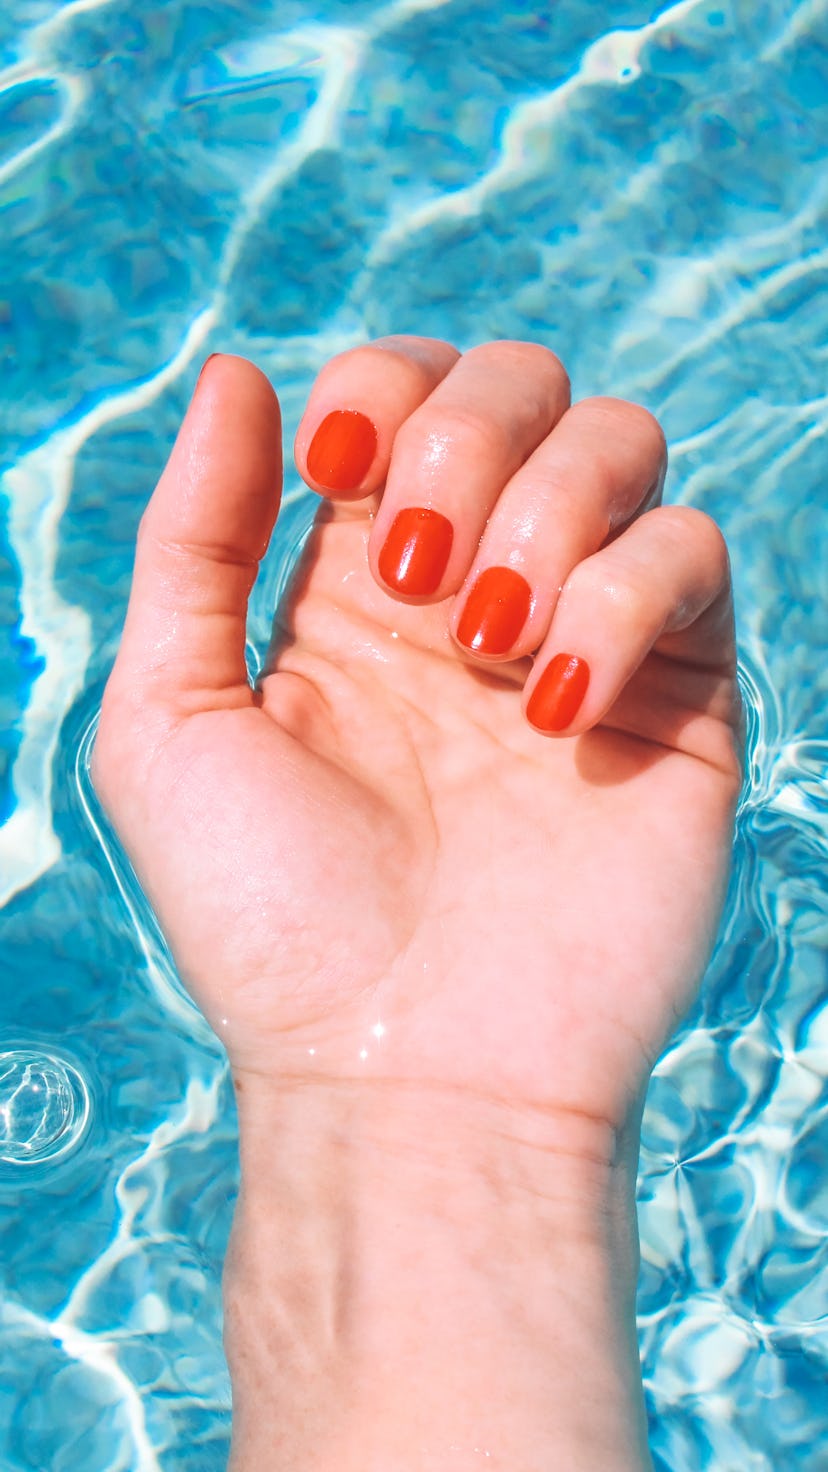 Personal perspective of a woman's wrist and palm of hand in swimming pool during a summer vacation. ...